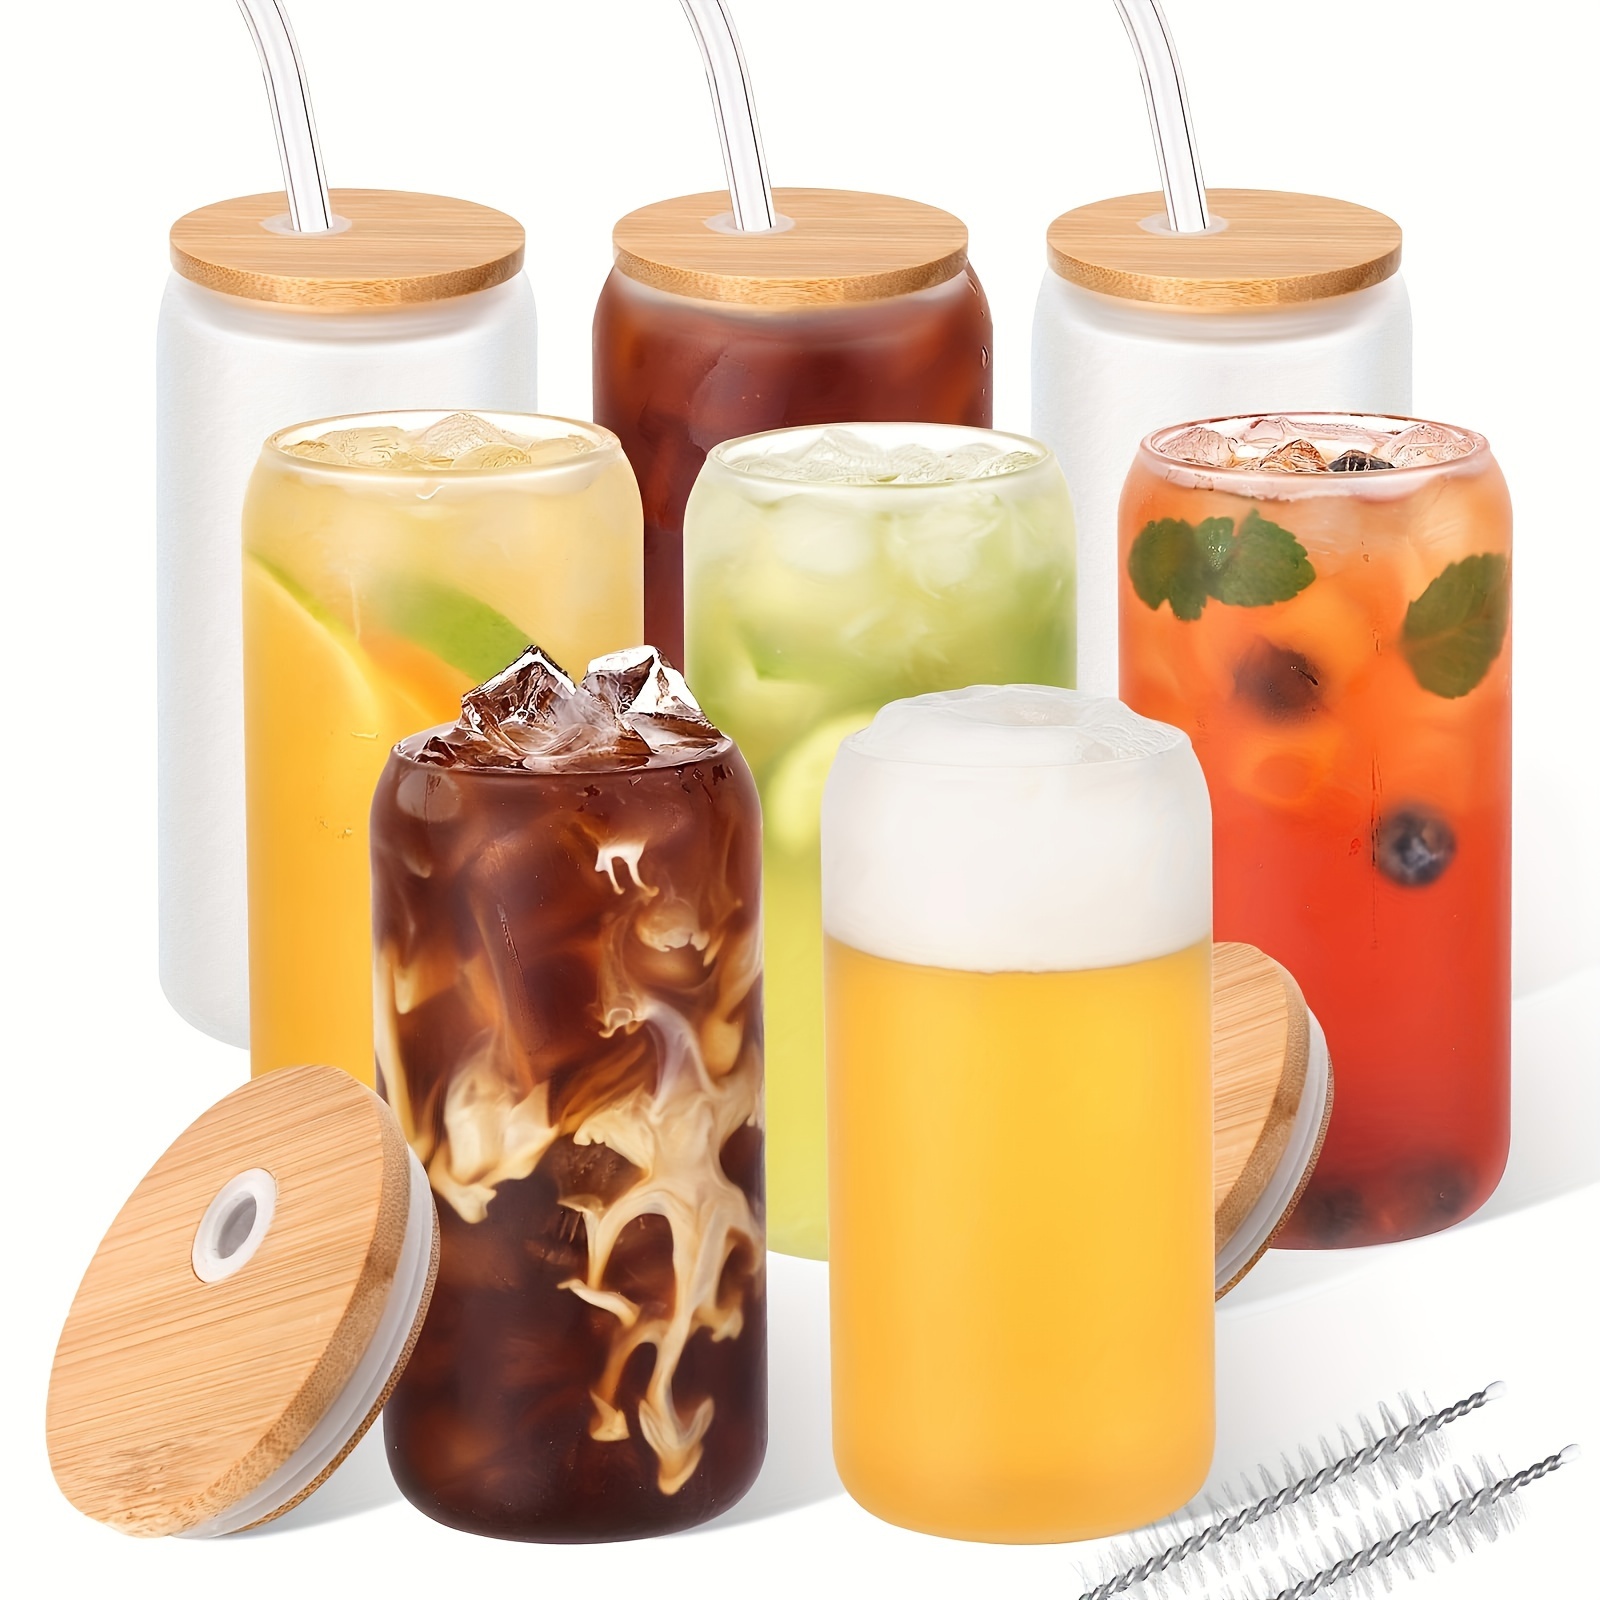  8 Pcs Drinking Glasses with Bamboo Lids and Glass